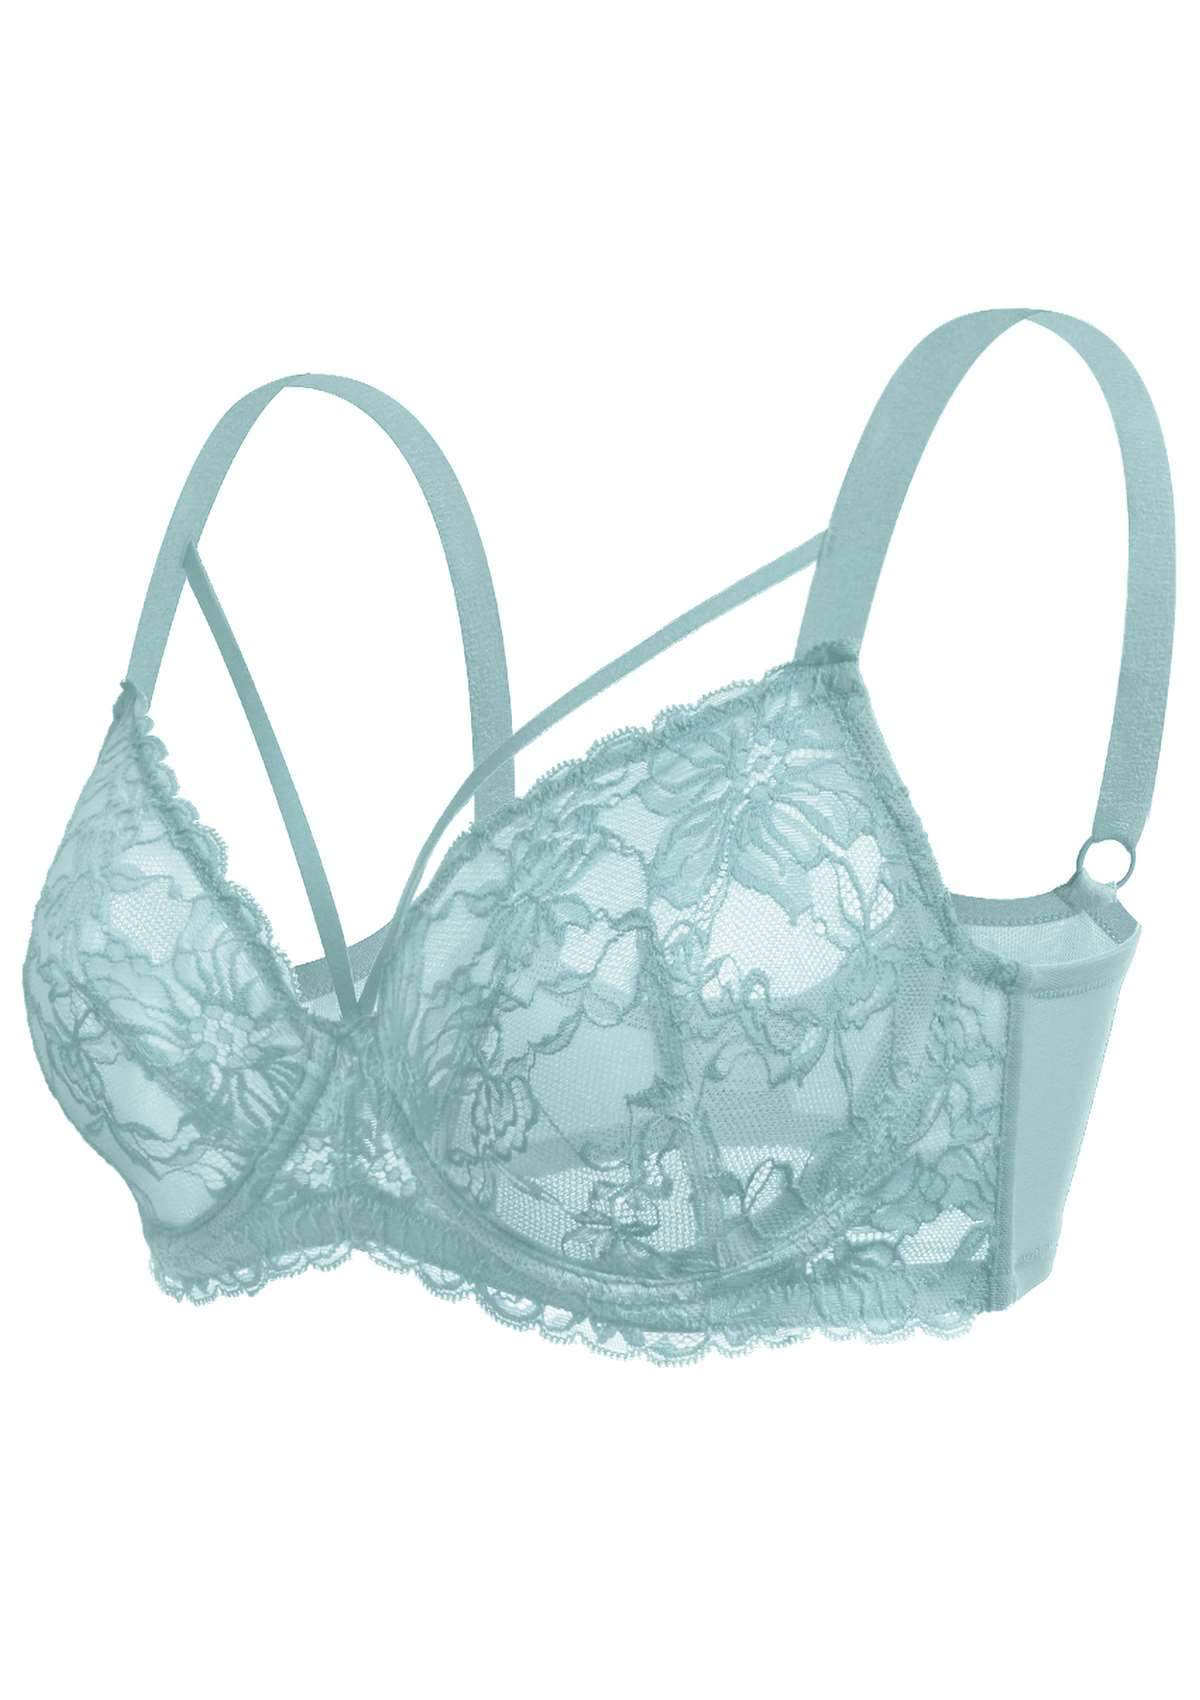 HSIA Pretty In Petals Unlined Lace Bra: Comfortable And Supportive Bra - Crystal Blue / 34 / C